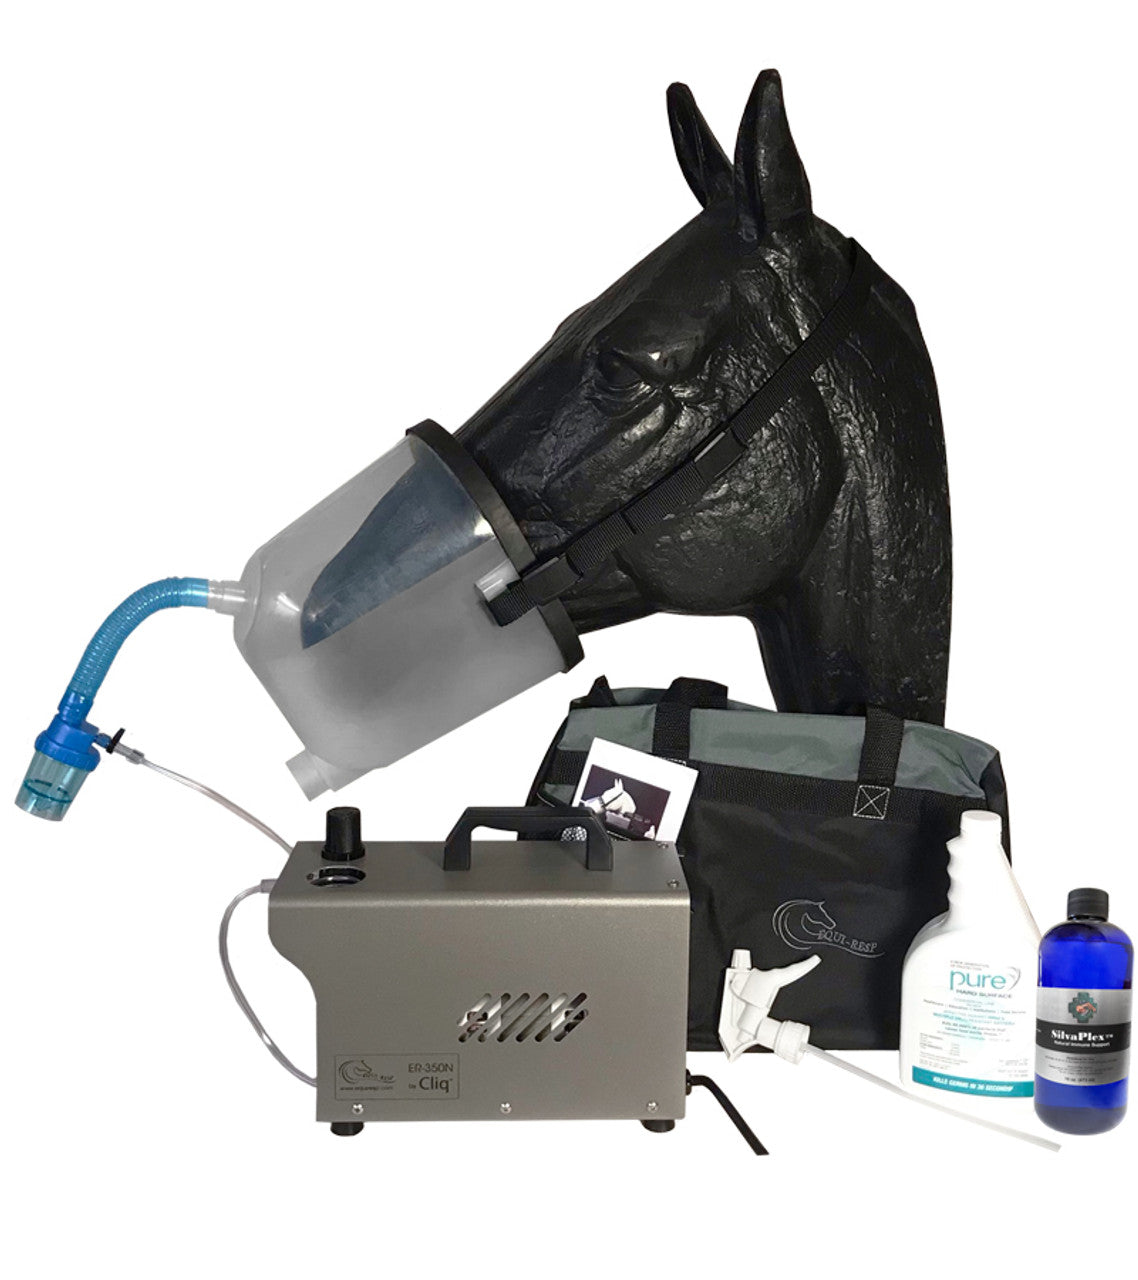 horse equine nebulizer unit on black horse display for sale with parts and components